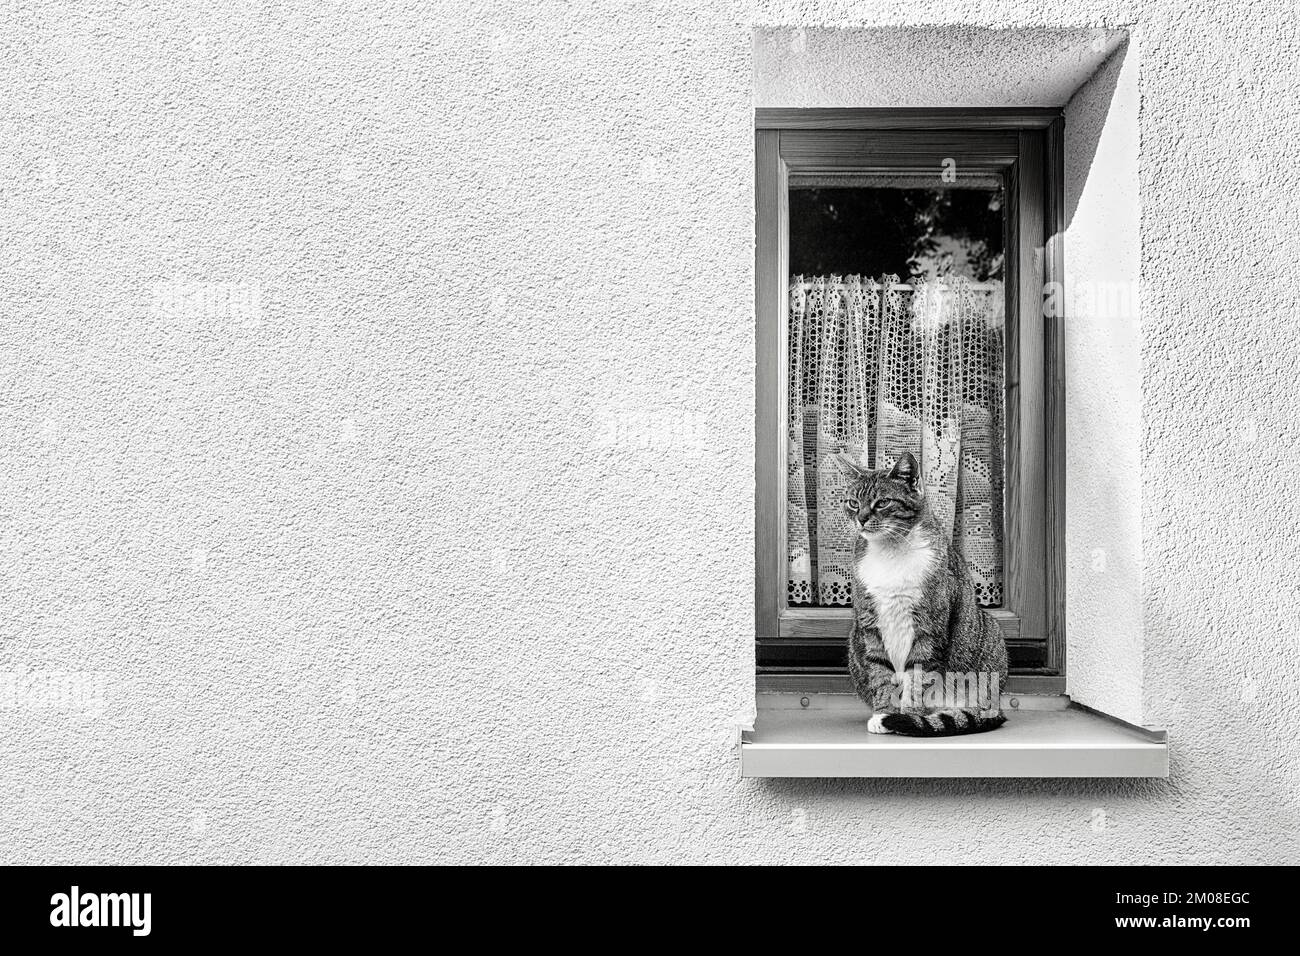 White façade with narrow window, house cat sitting alertly on windowsill in window recess, symbolic image, text free space, black and white image Stock Photo